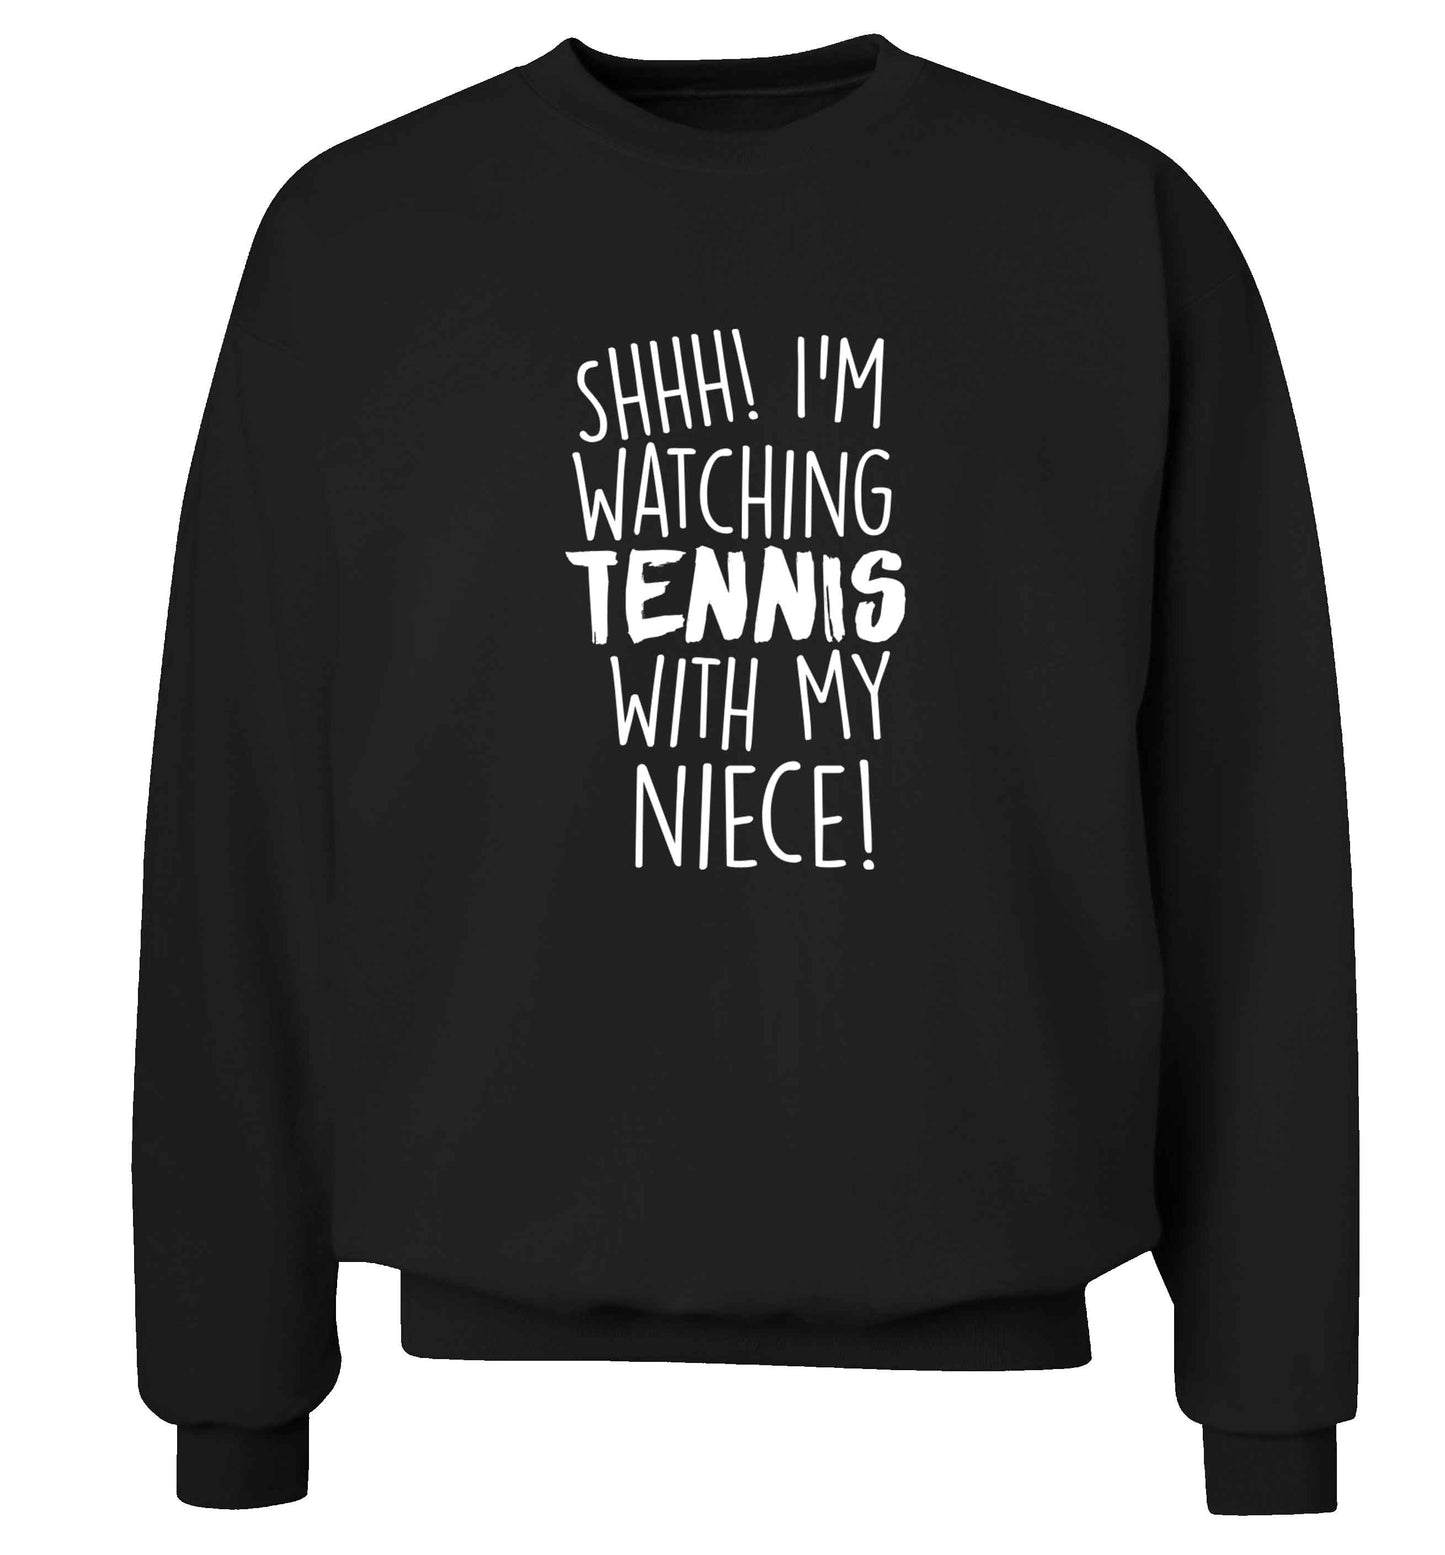 Shh! I'm watching tennis with my niece! Adult's unisex black Sweater 2XL